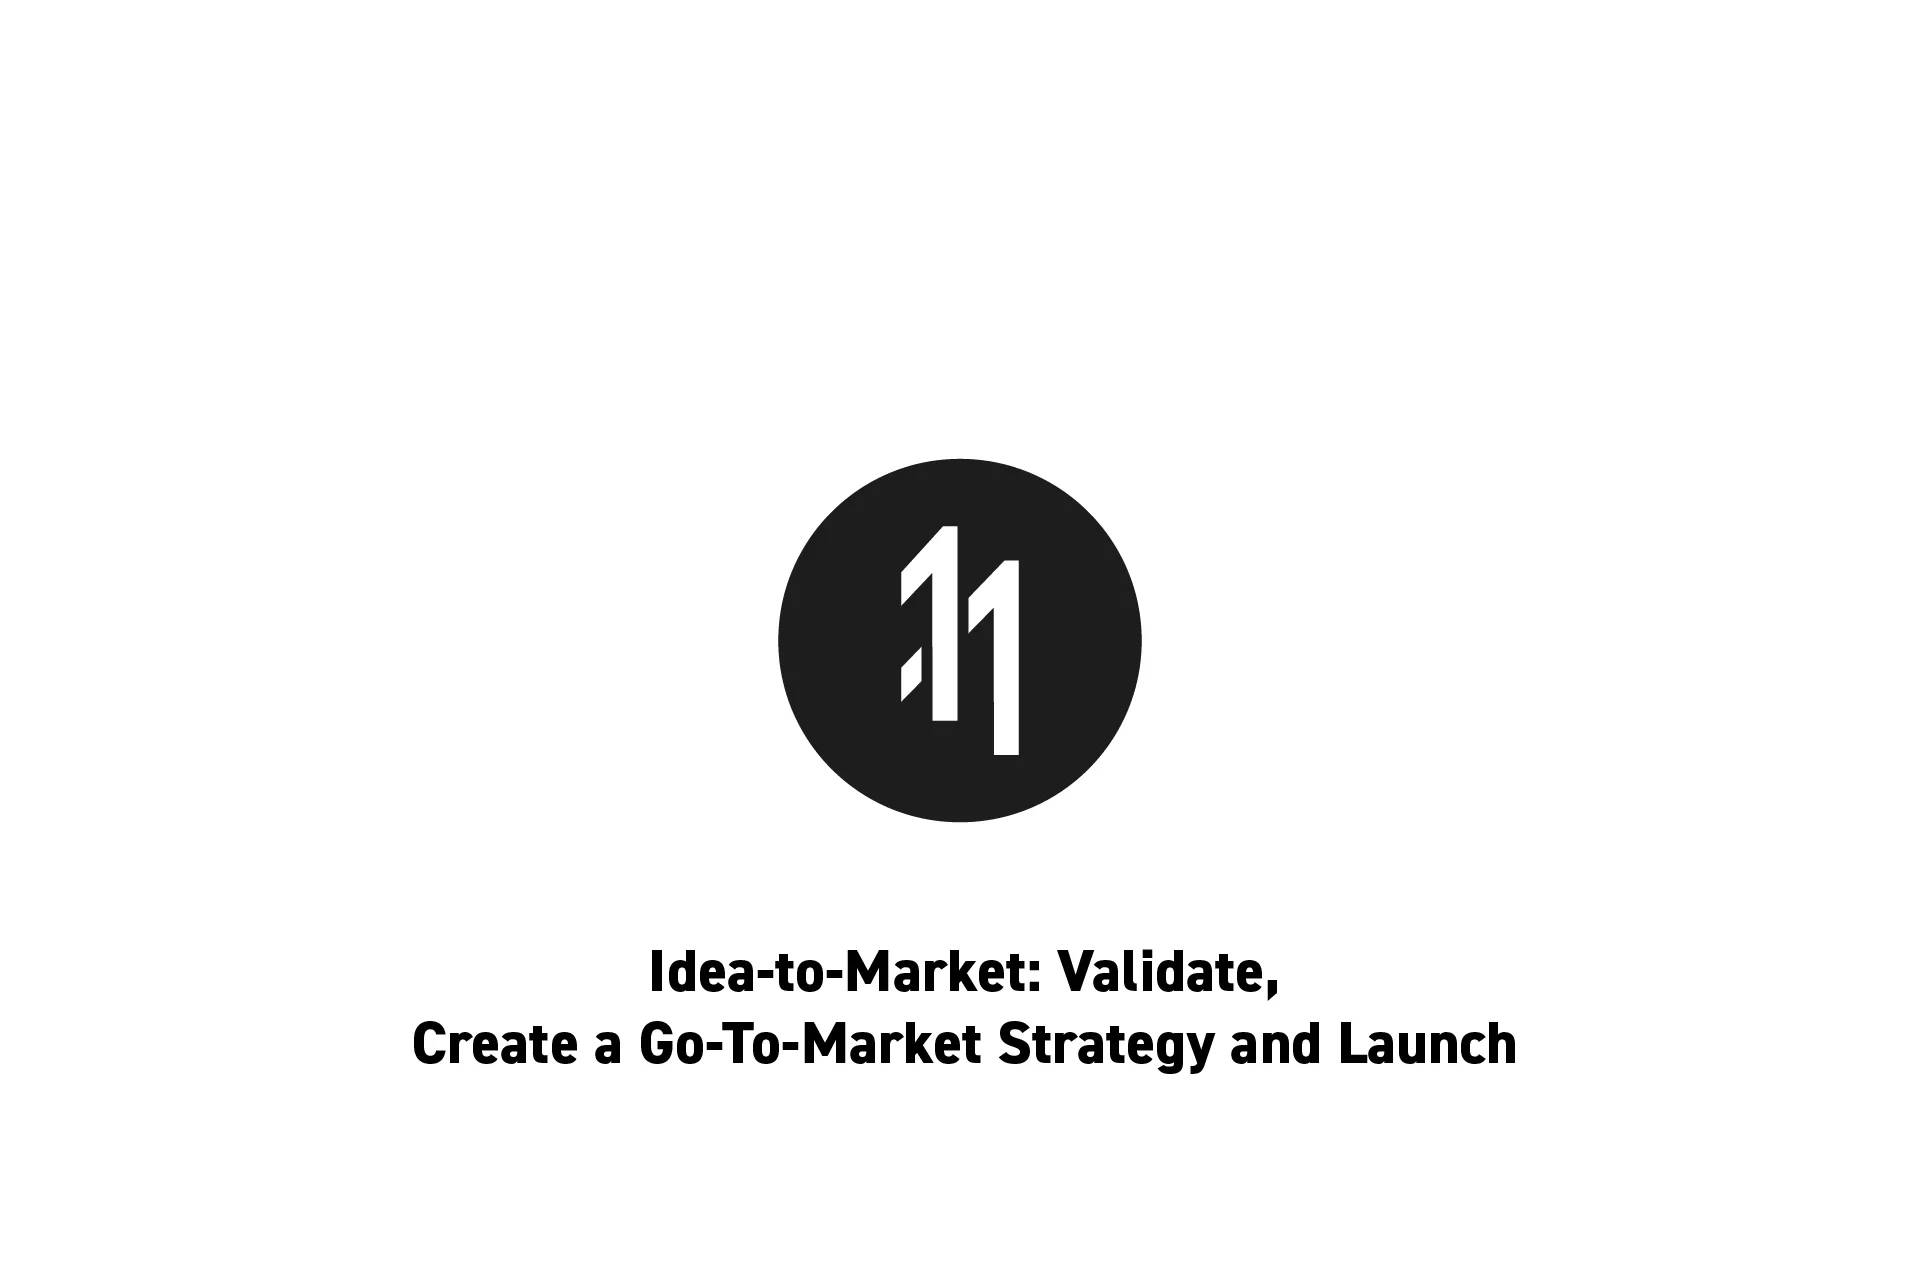 <p>The delasign logo with the text "Idea-to-Market: Validate, Create a Go-To-Market Strategy and Launch" beneath it.</p>